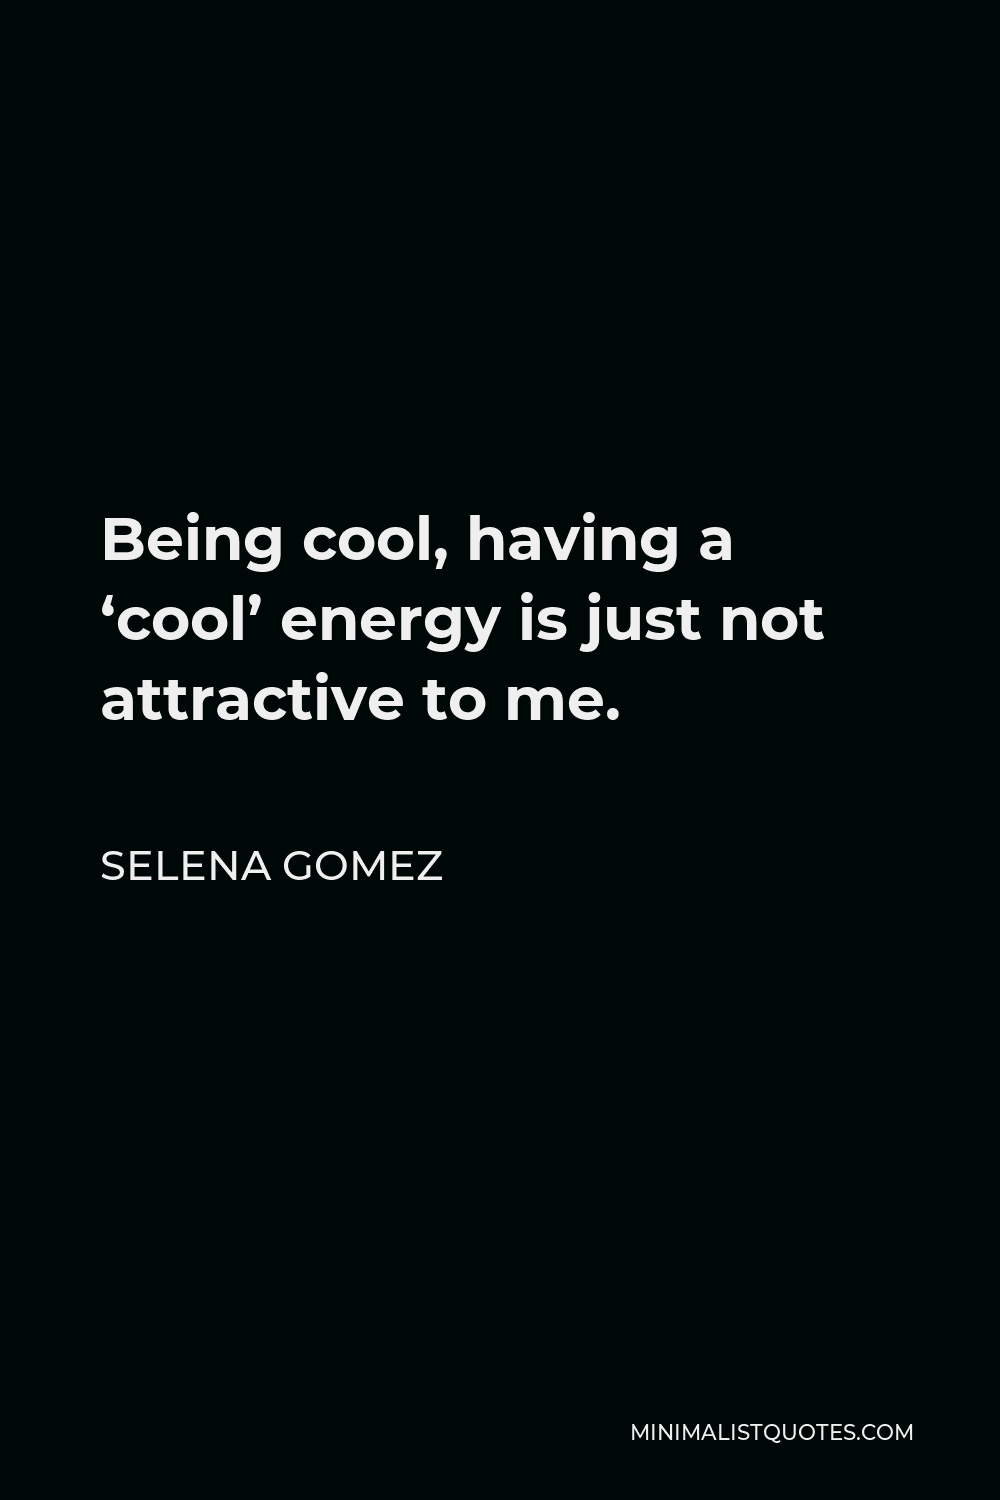 Selena Gomez Quote - Being cool, having a ‘cool’ energy is just not attractive to me.